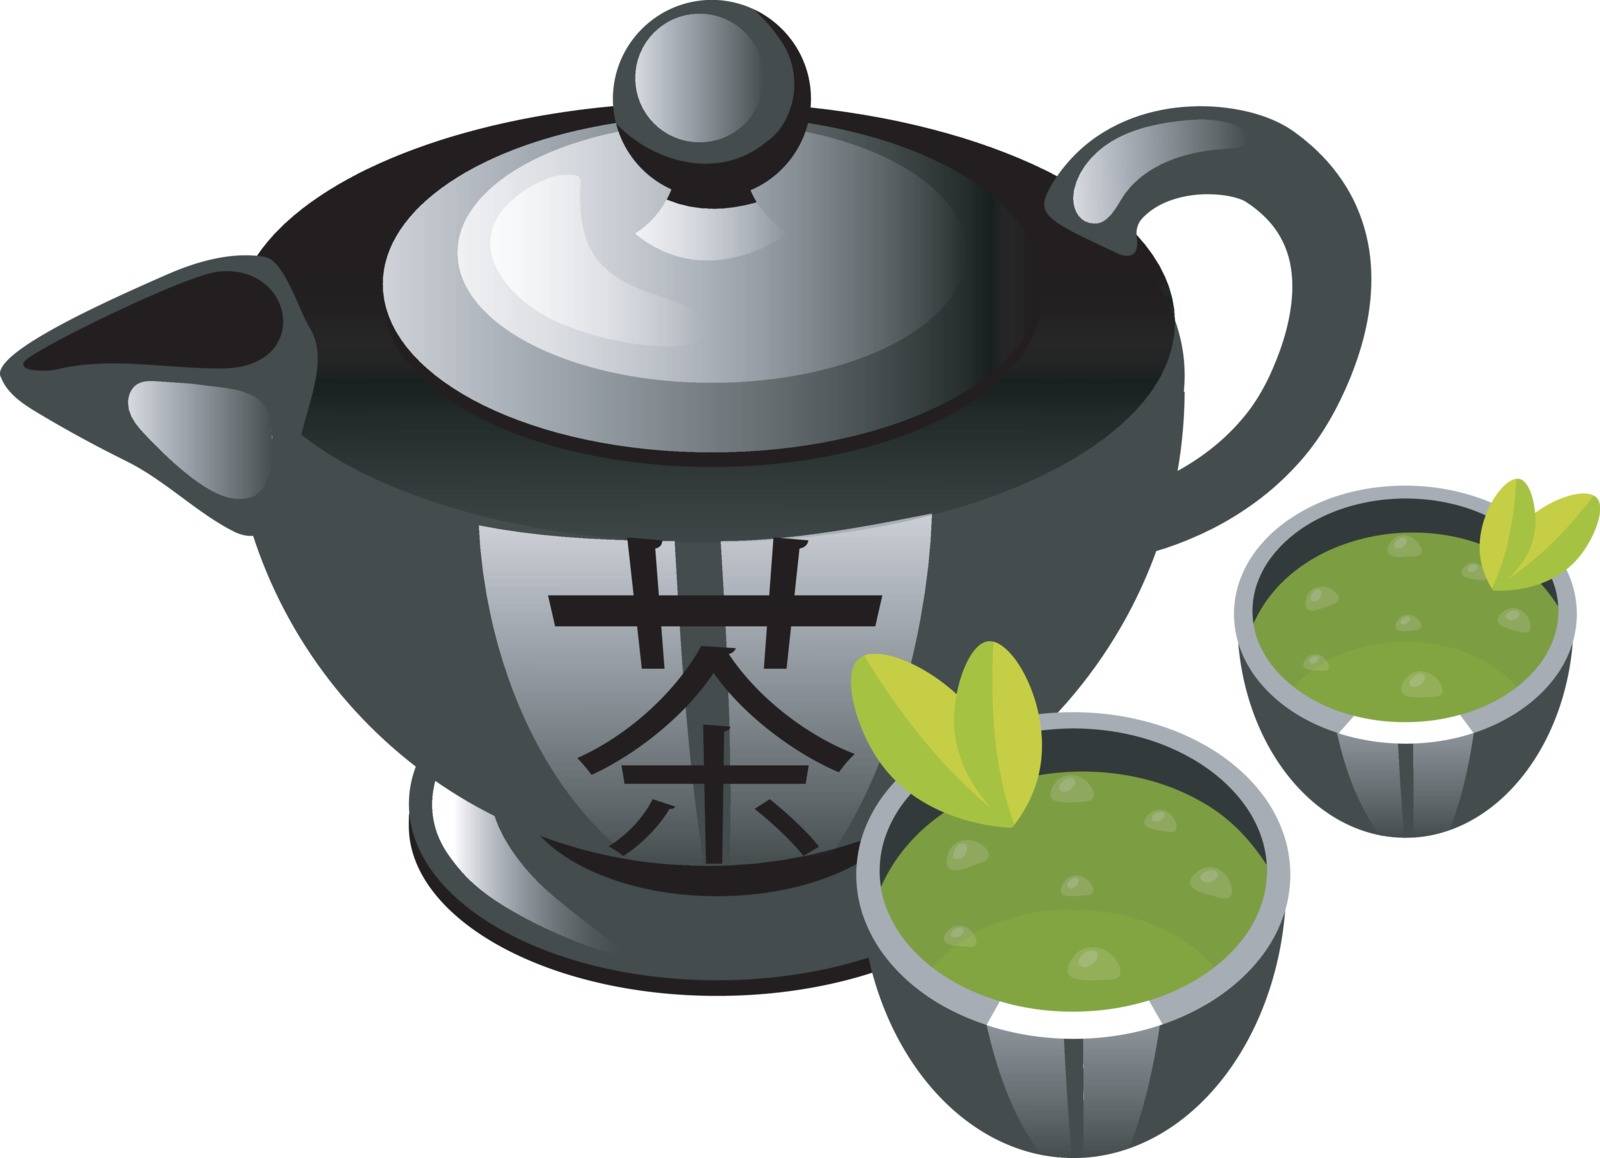 Chinese tea ceremony color icon. Teapot with cups. Asian green tea. Hot drink in porcelain teaware. Teahouse atmosphere. Chinese traditions and culture. Isolated vector illustration